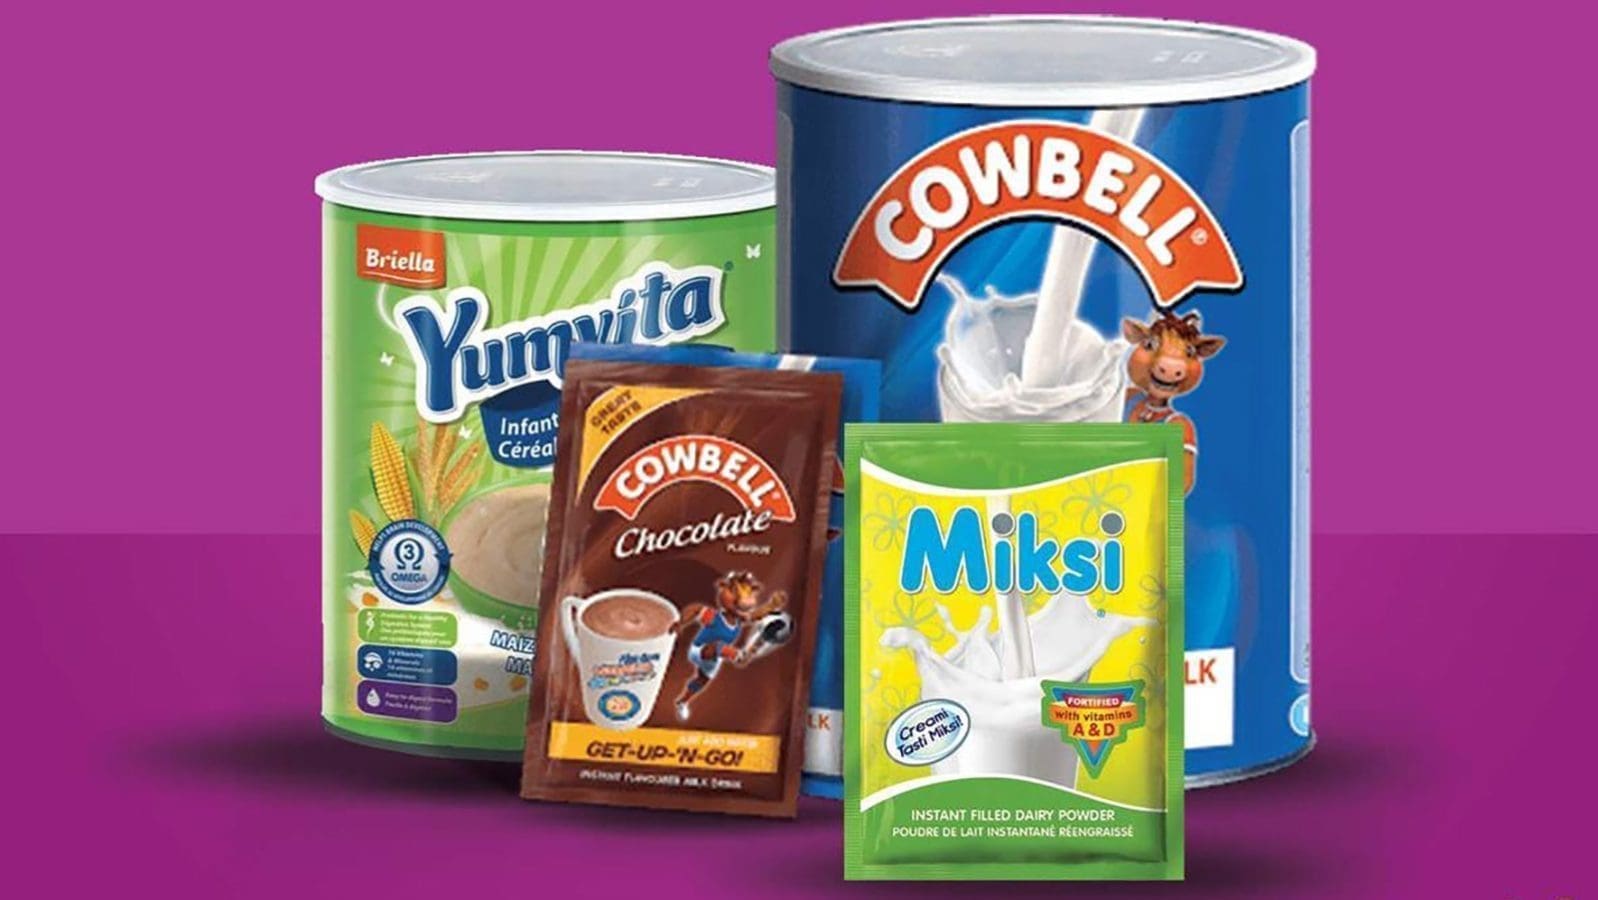 Cowbell milk producer Promasidor rumoured to contemplate US$1.5 billion sale